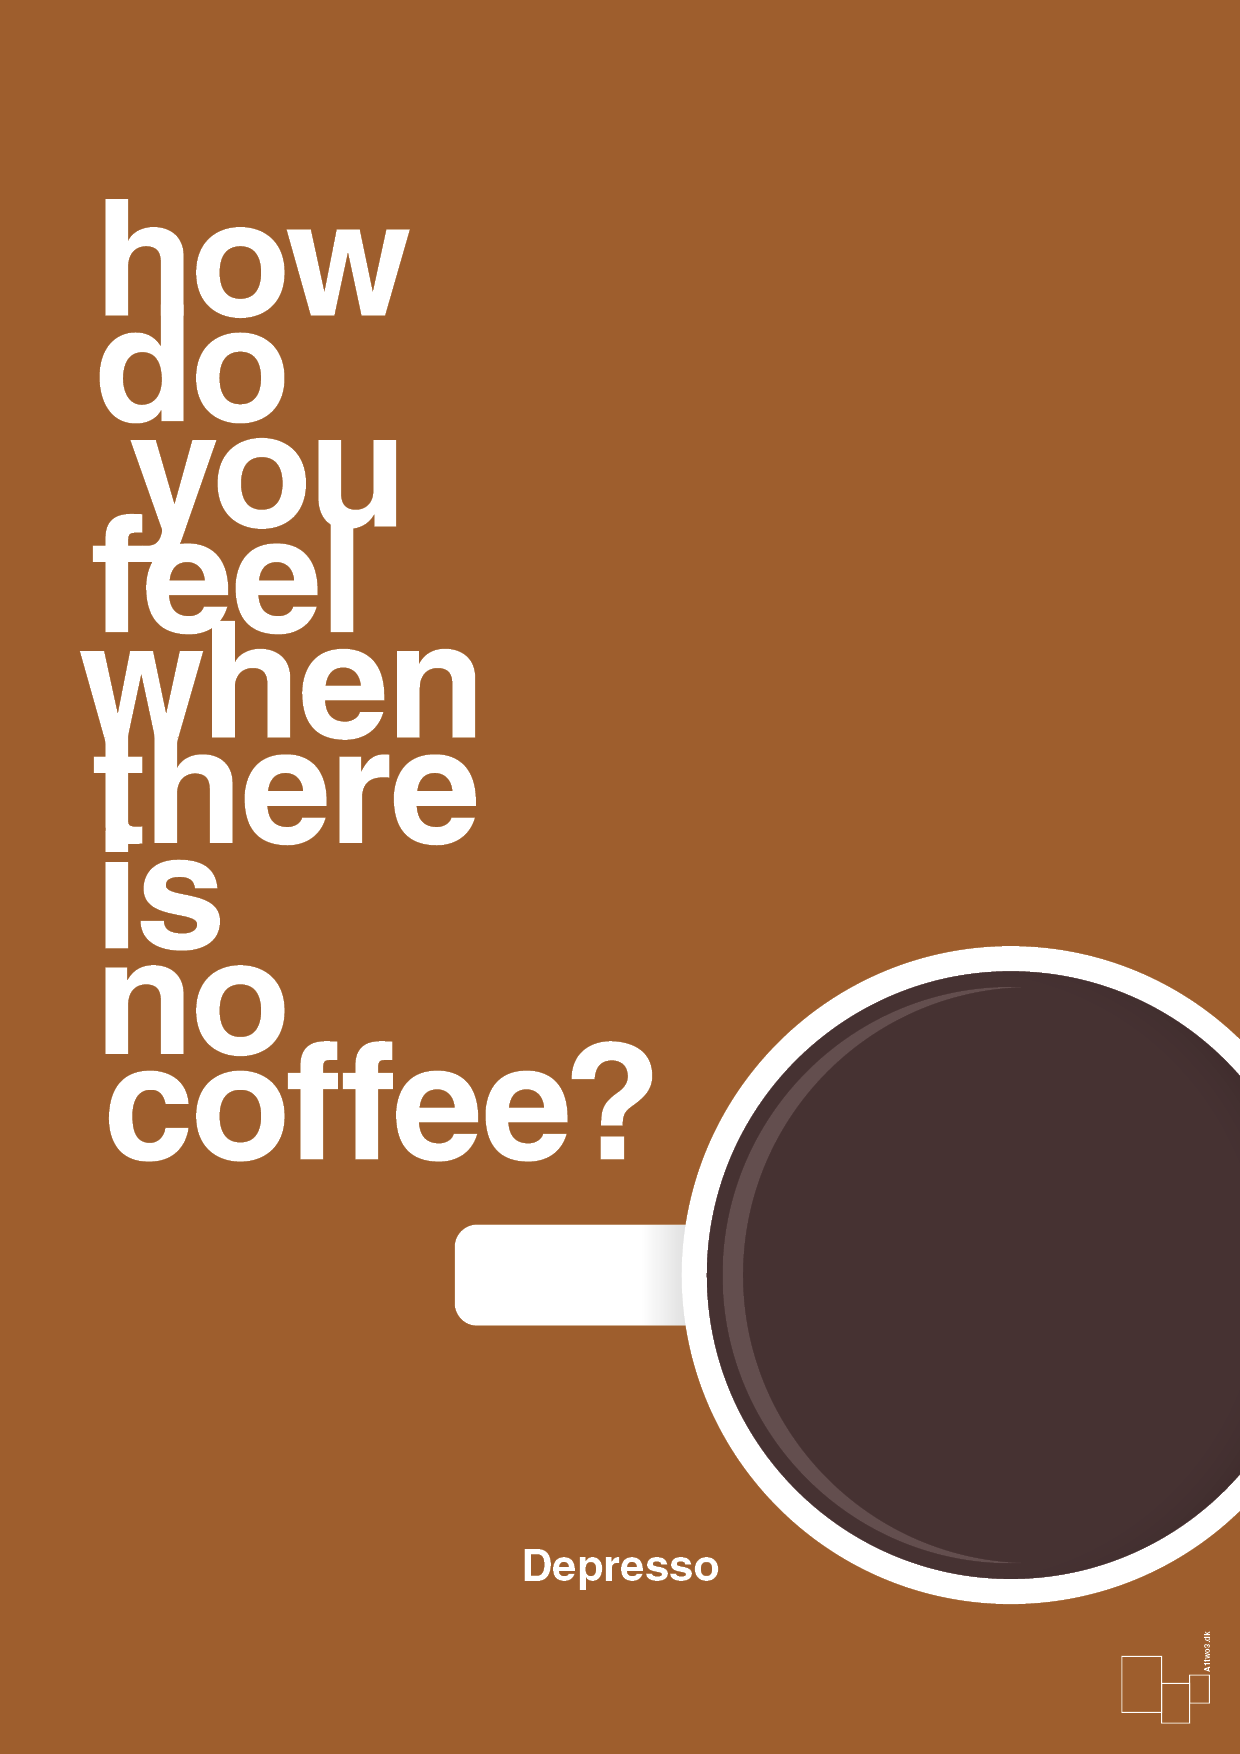 how do you feel when there is no coffee? depresso - Plakat med Mad & Drikke i Cognac